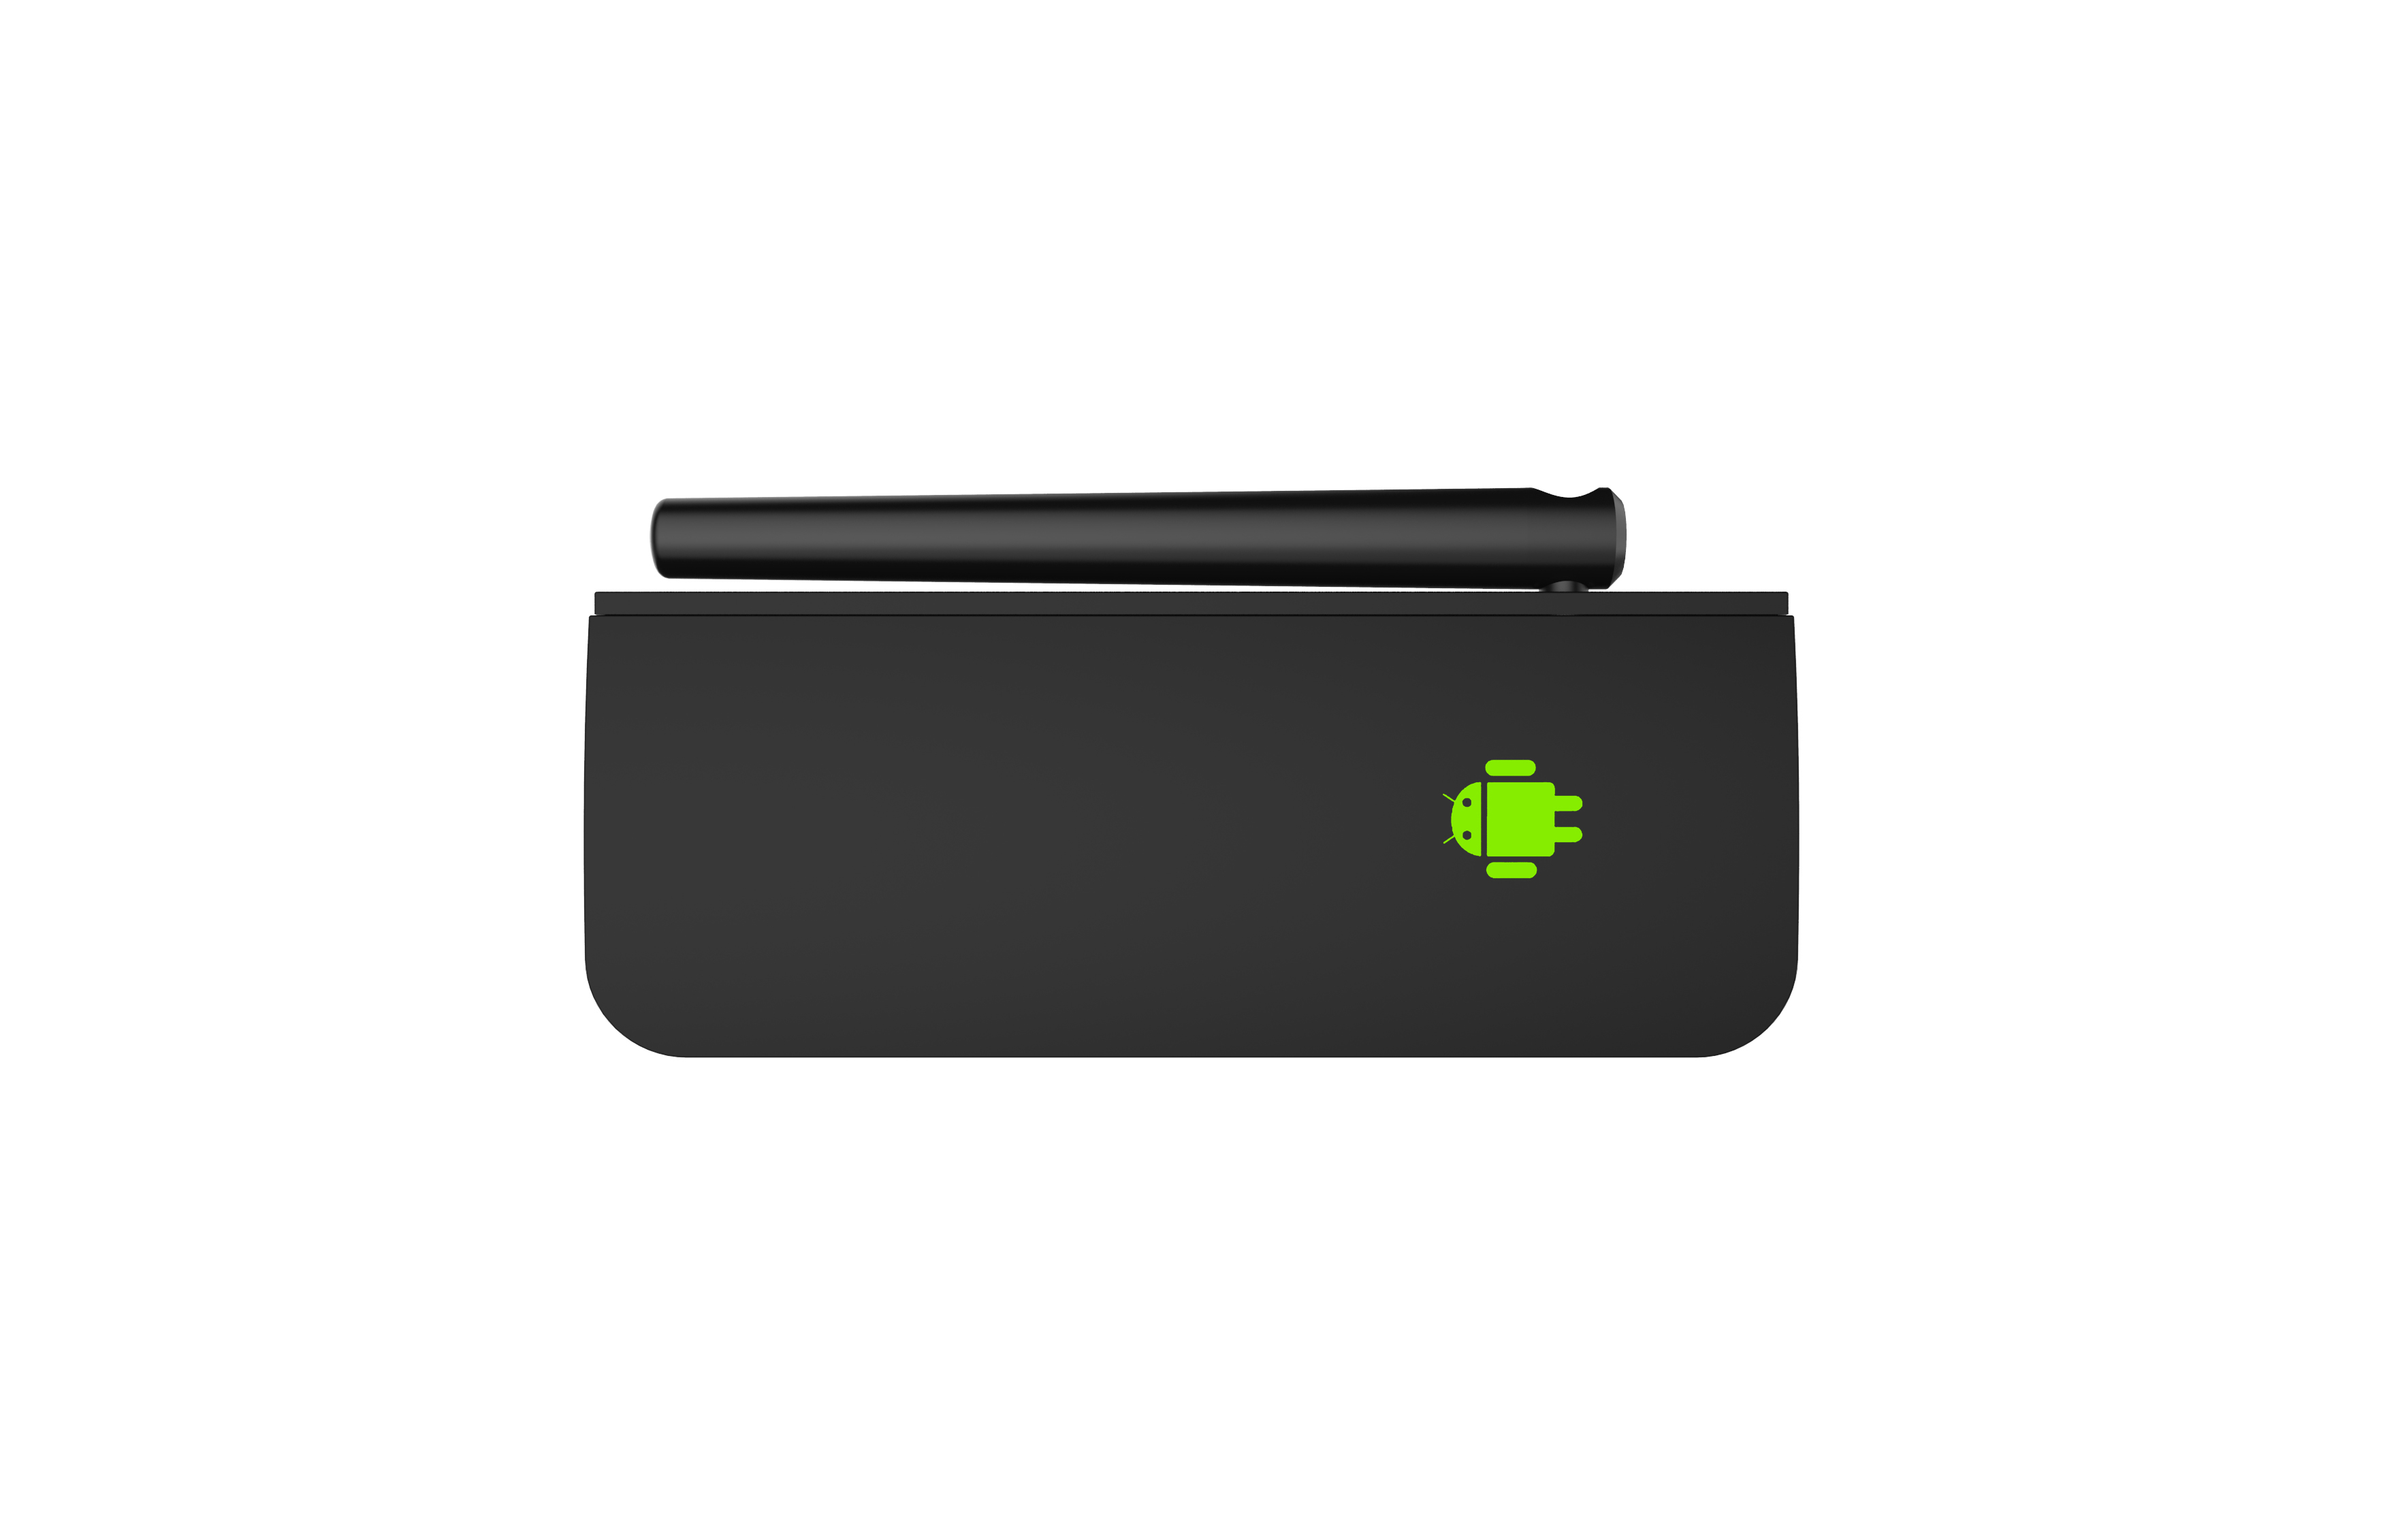 ANDRIOD TV DONGLE